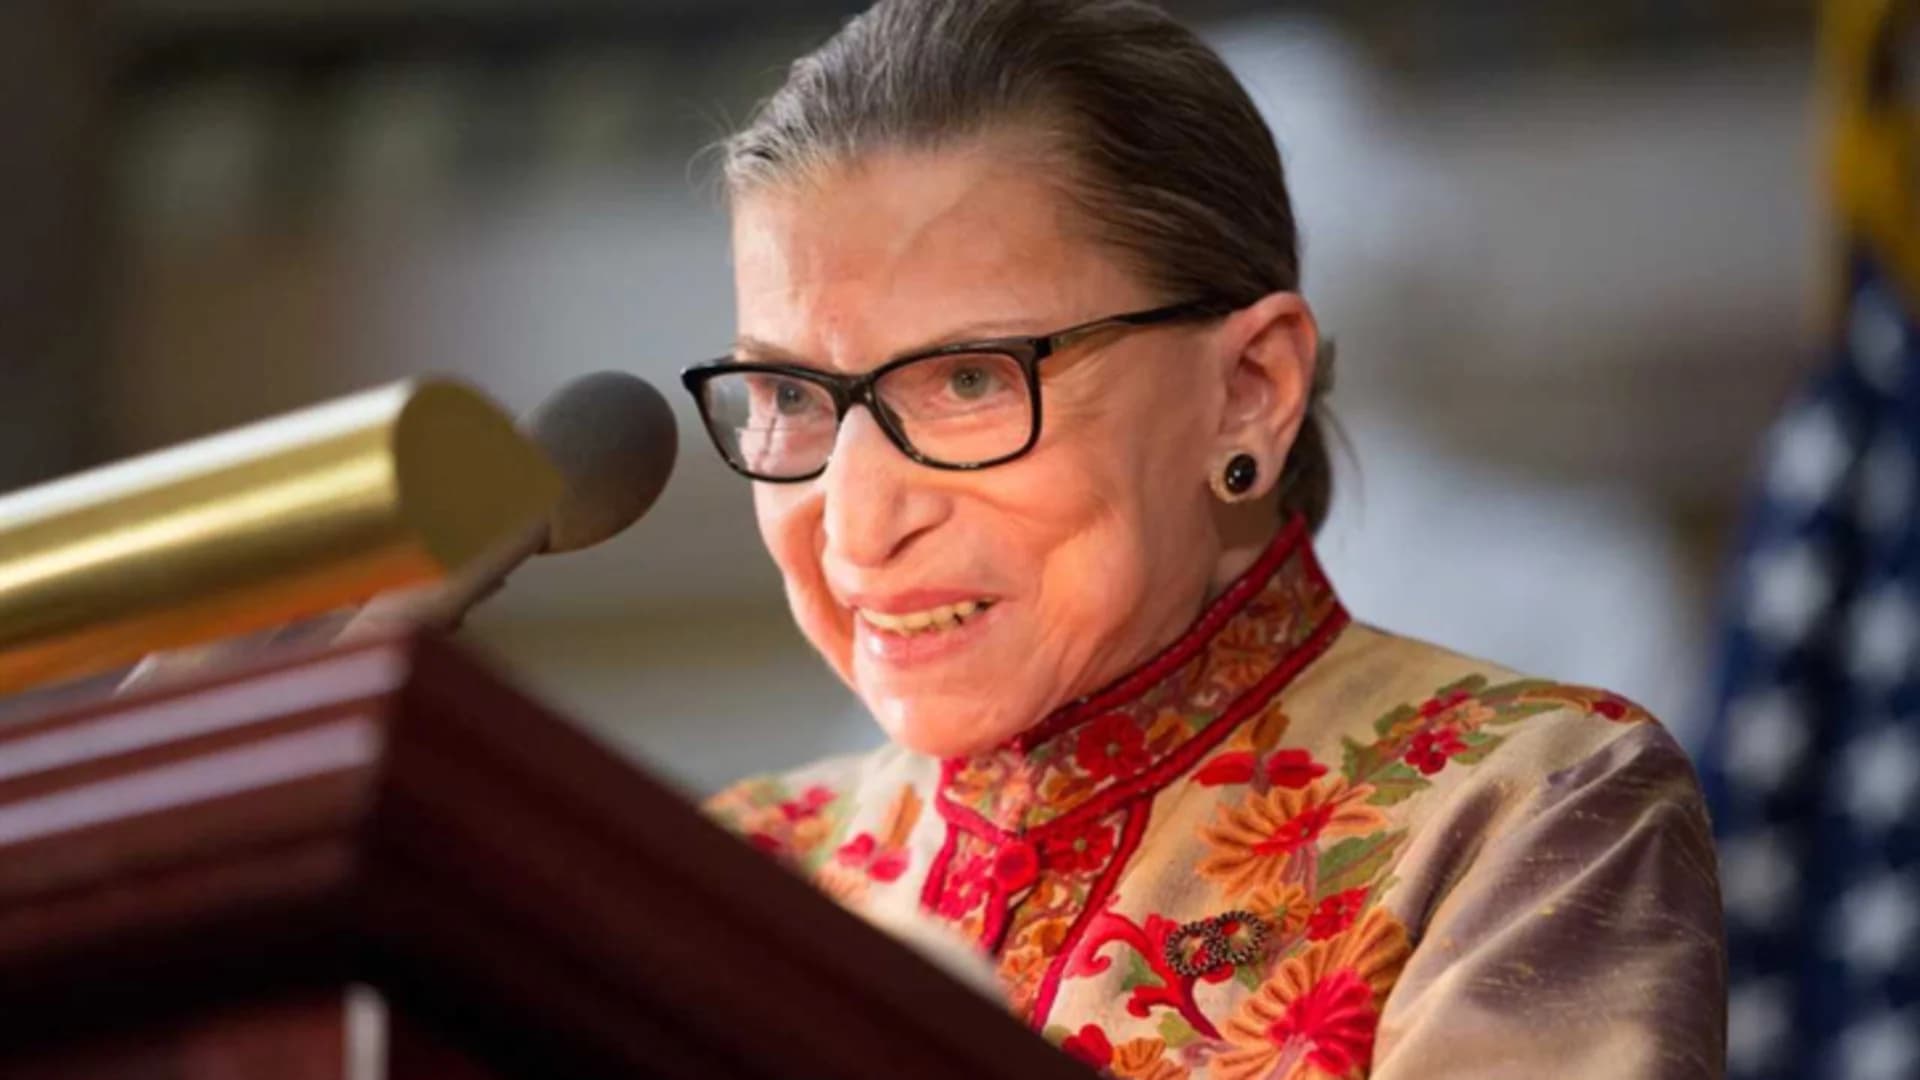 Justice Ginsburg has surgery to remove cancerous growths